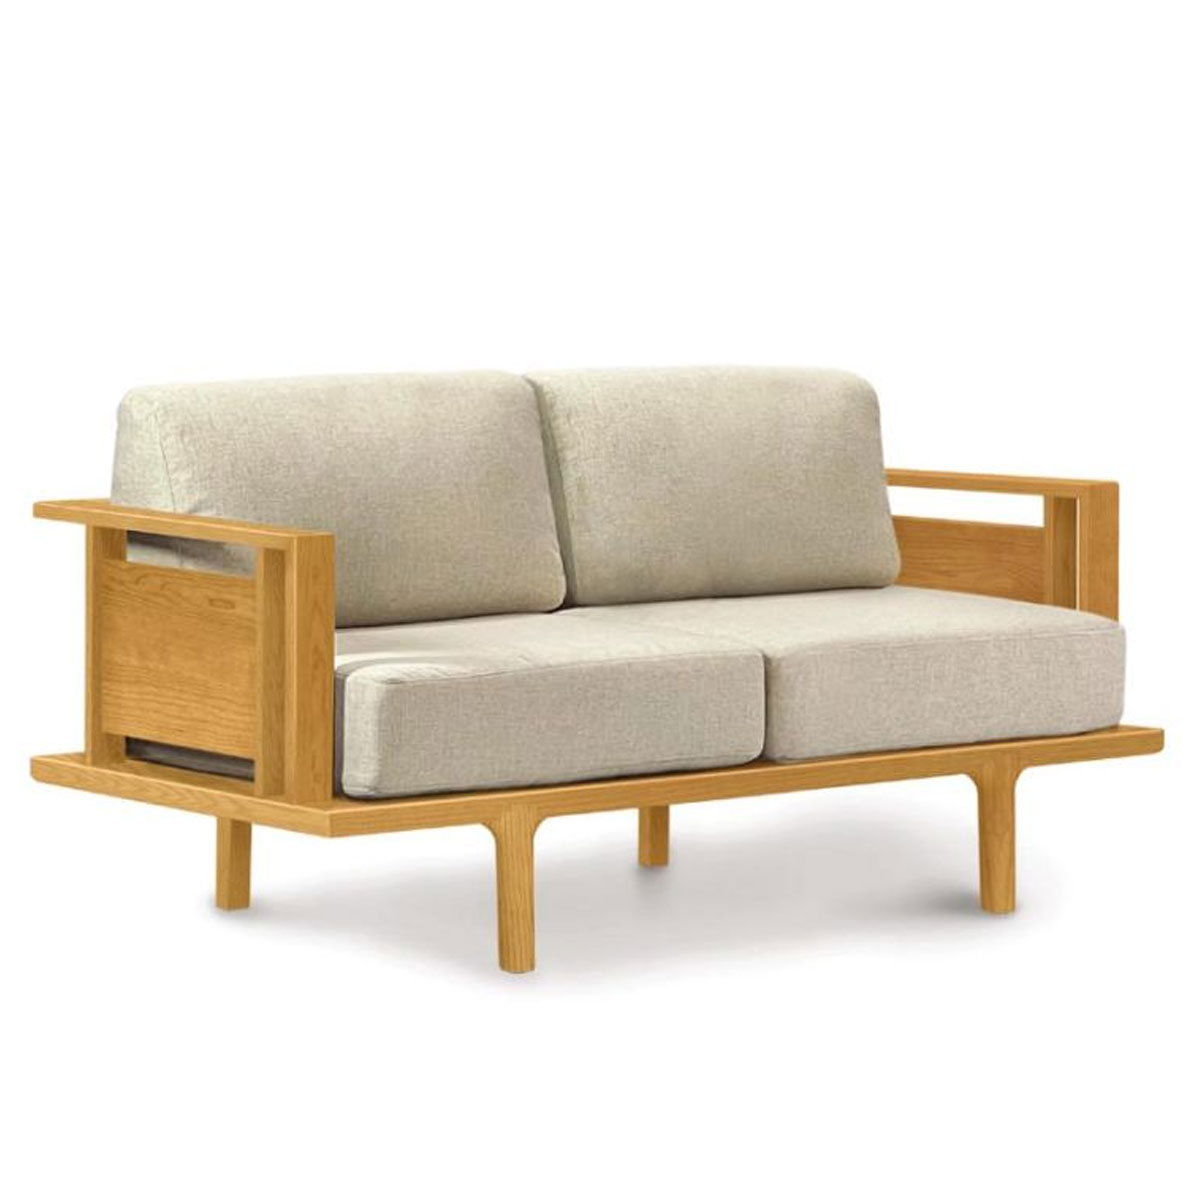 Copeland Sierra Loveseat with Wood Panels in Cherry